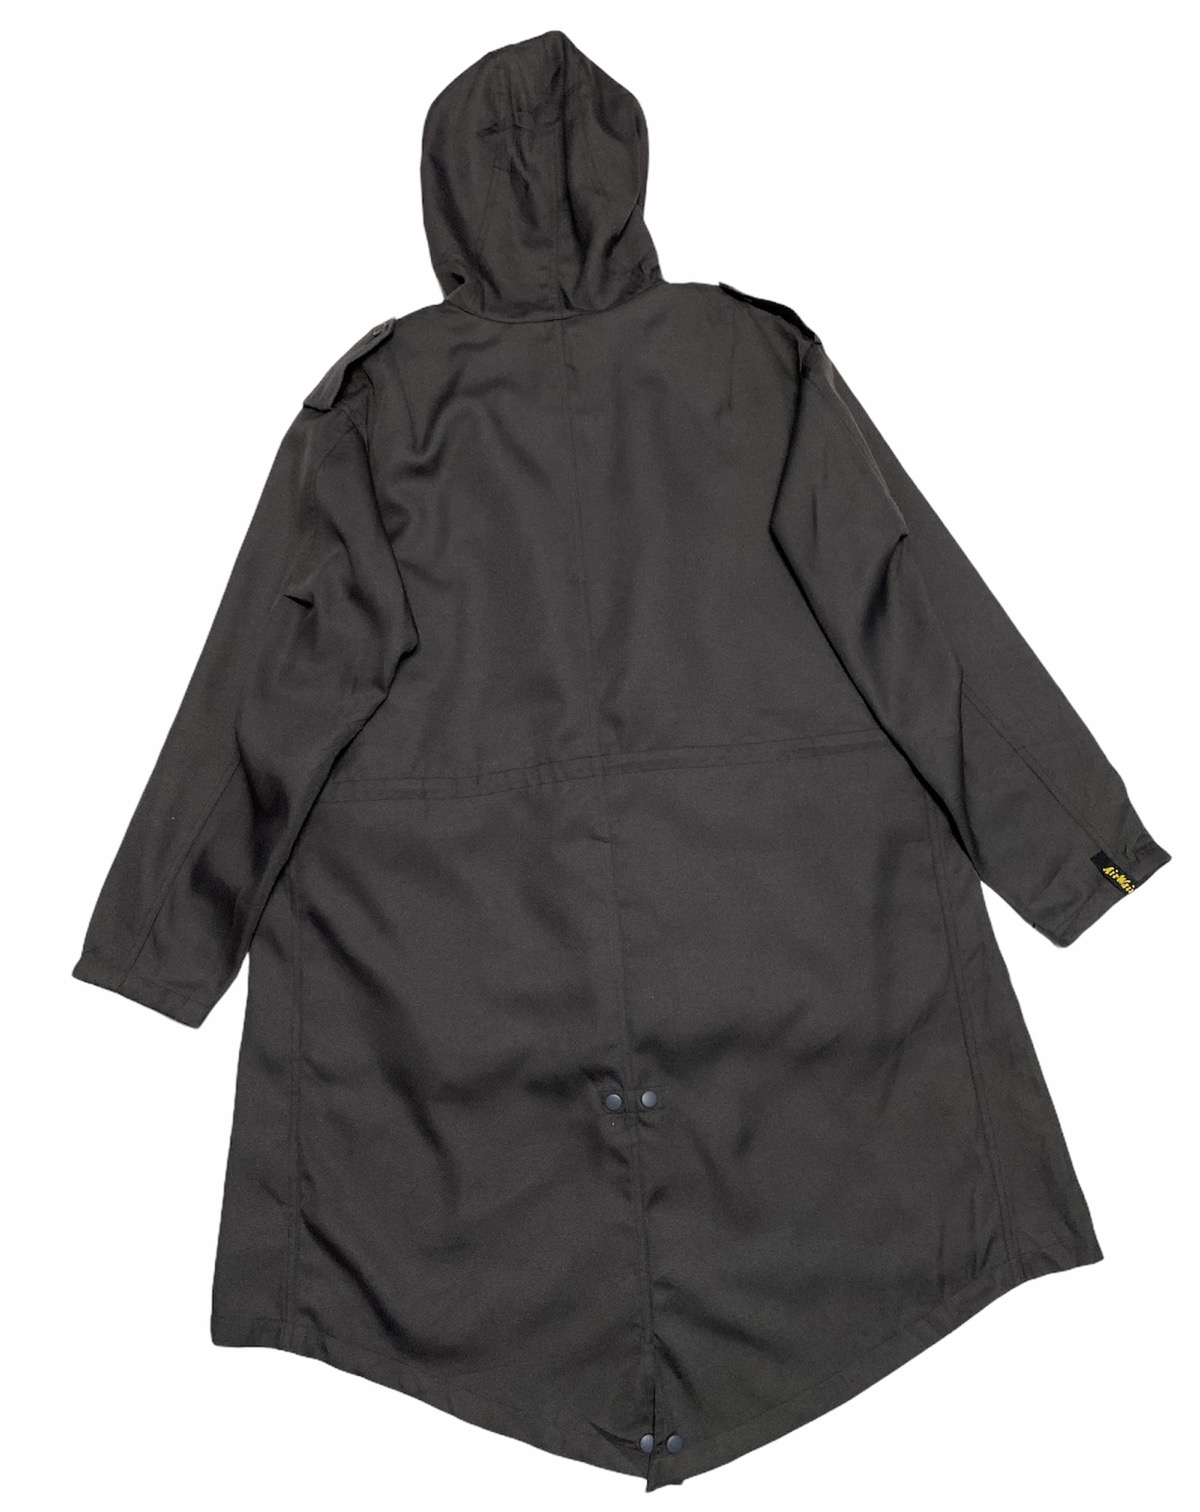 NWT !!!! DR.MARTENS TECHNICAL FISHTAIL PARKA HOODIE - 10